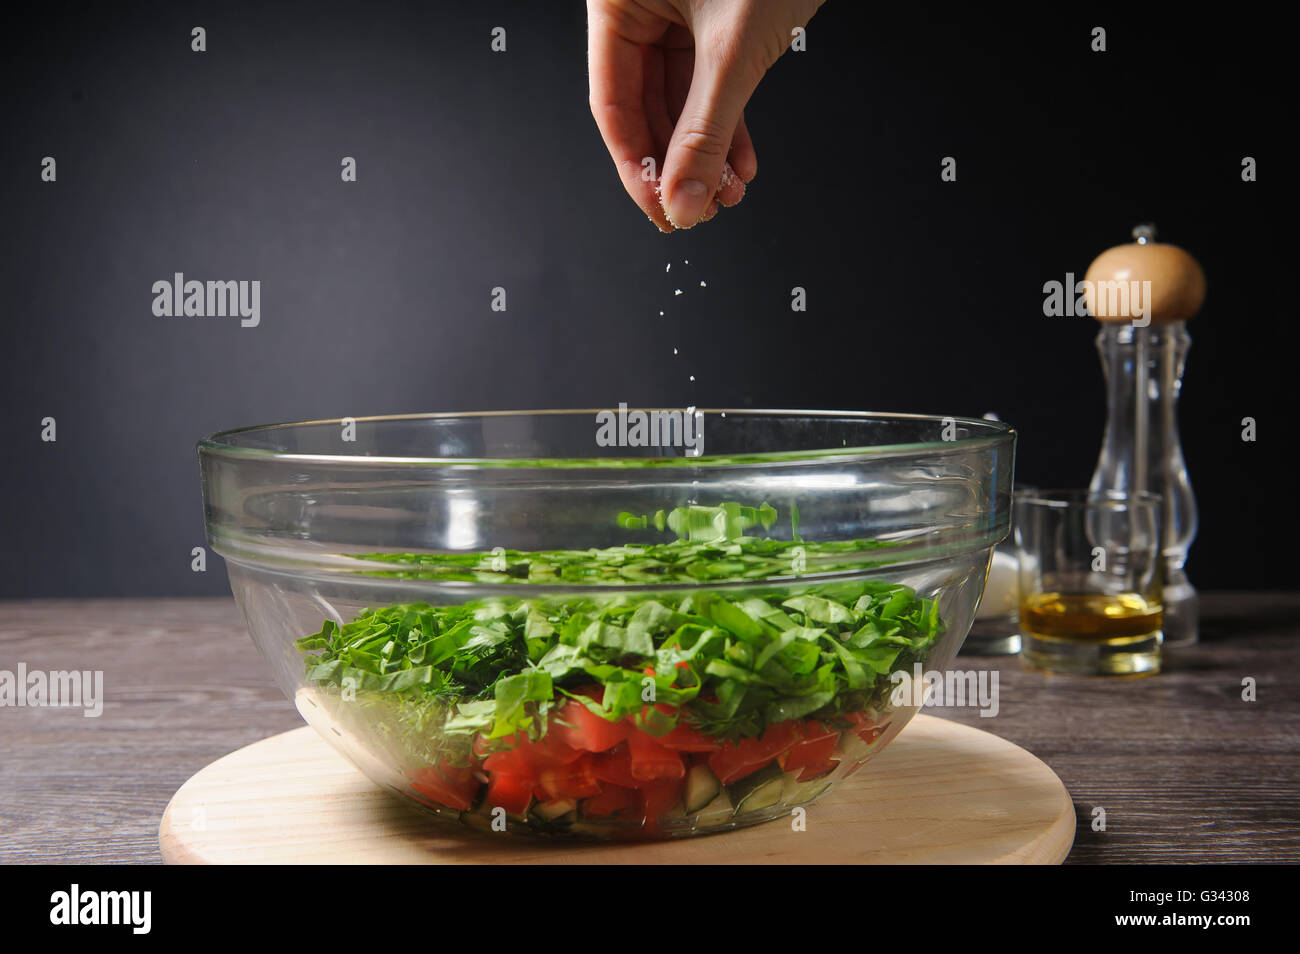 Hand adding salt to vegetable salad. Bowl of fresh green salad, tomatoes, cucumber on wood table against dark background. Stock Photo